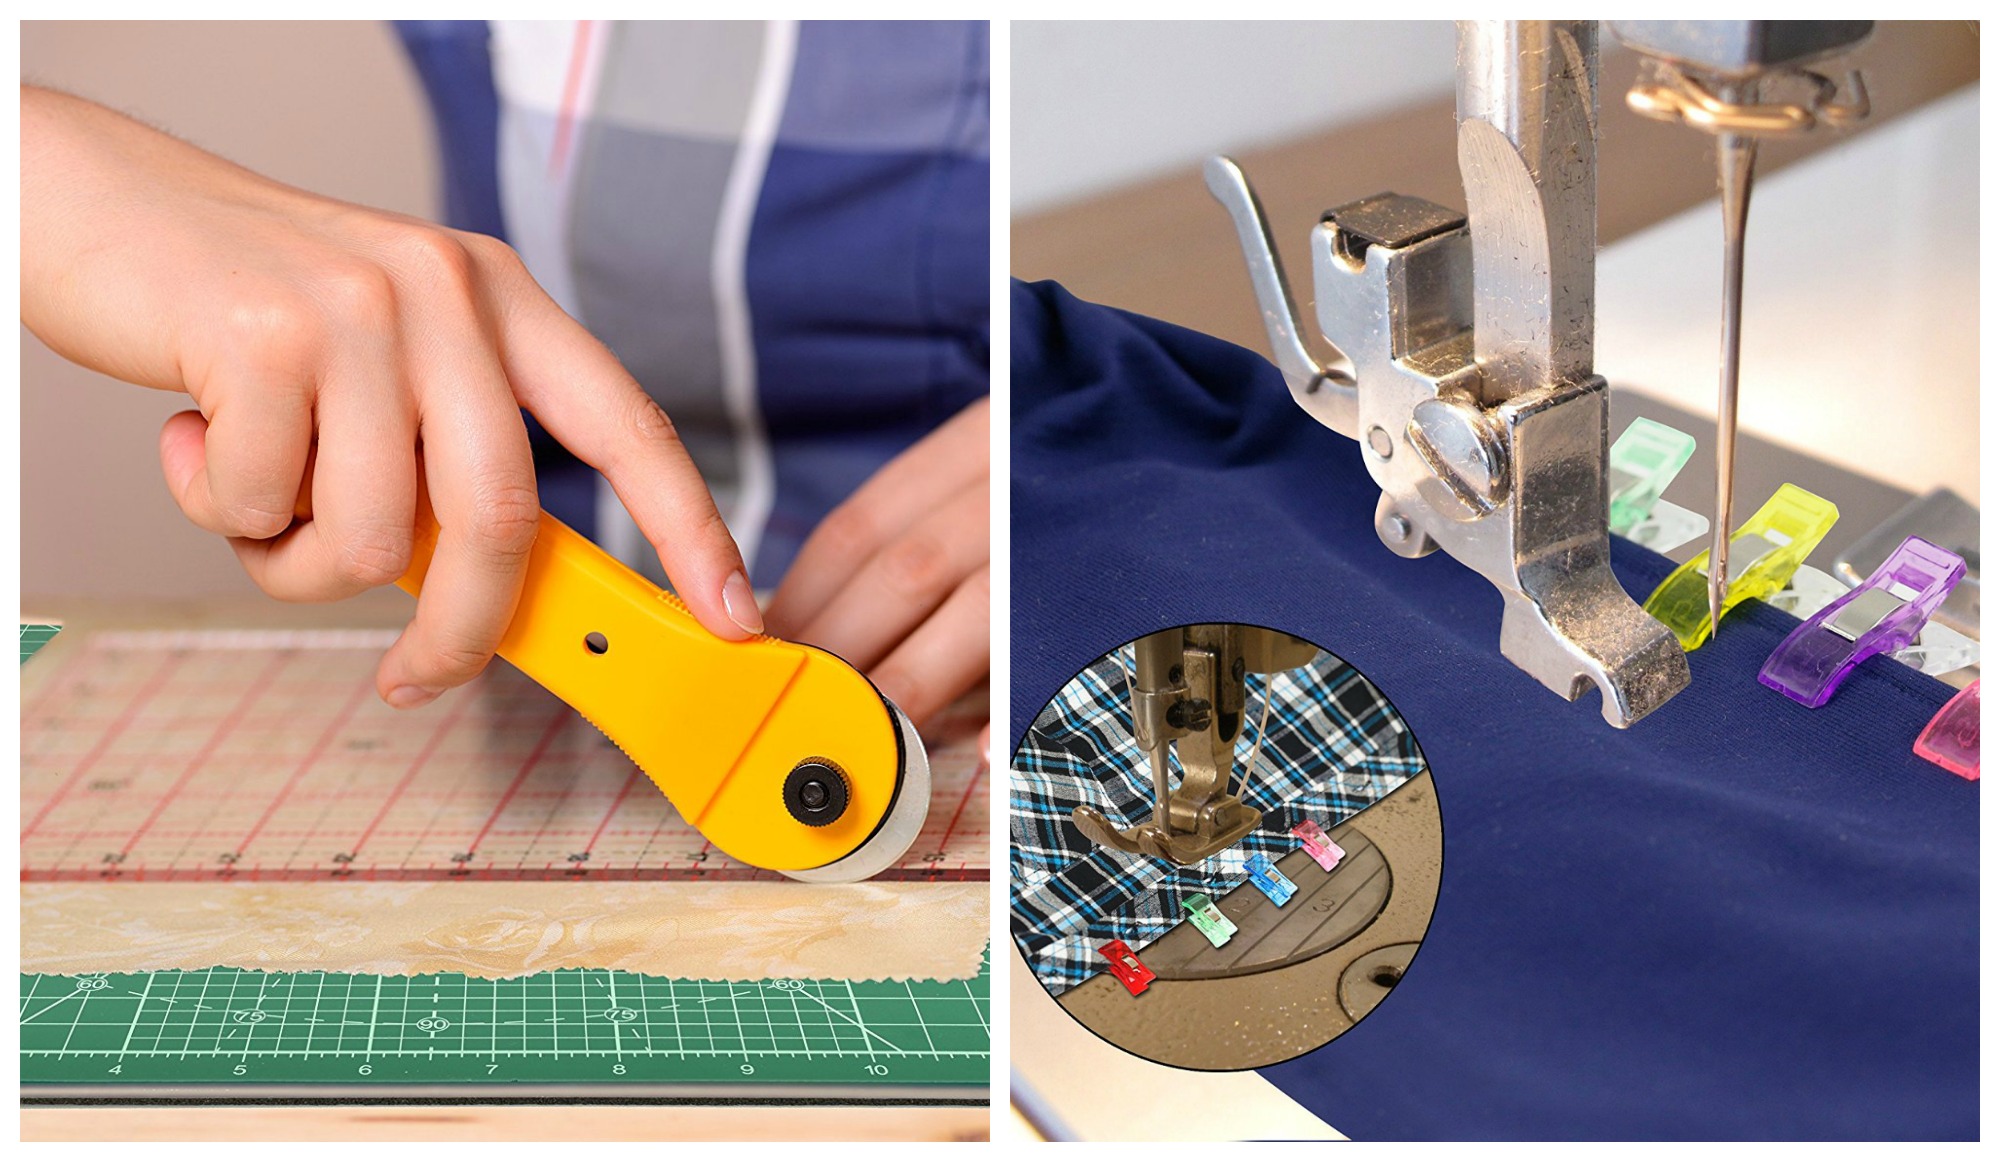 Do You Really Need This Sewing Tool? Here's How to Decide.